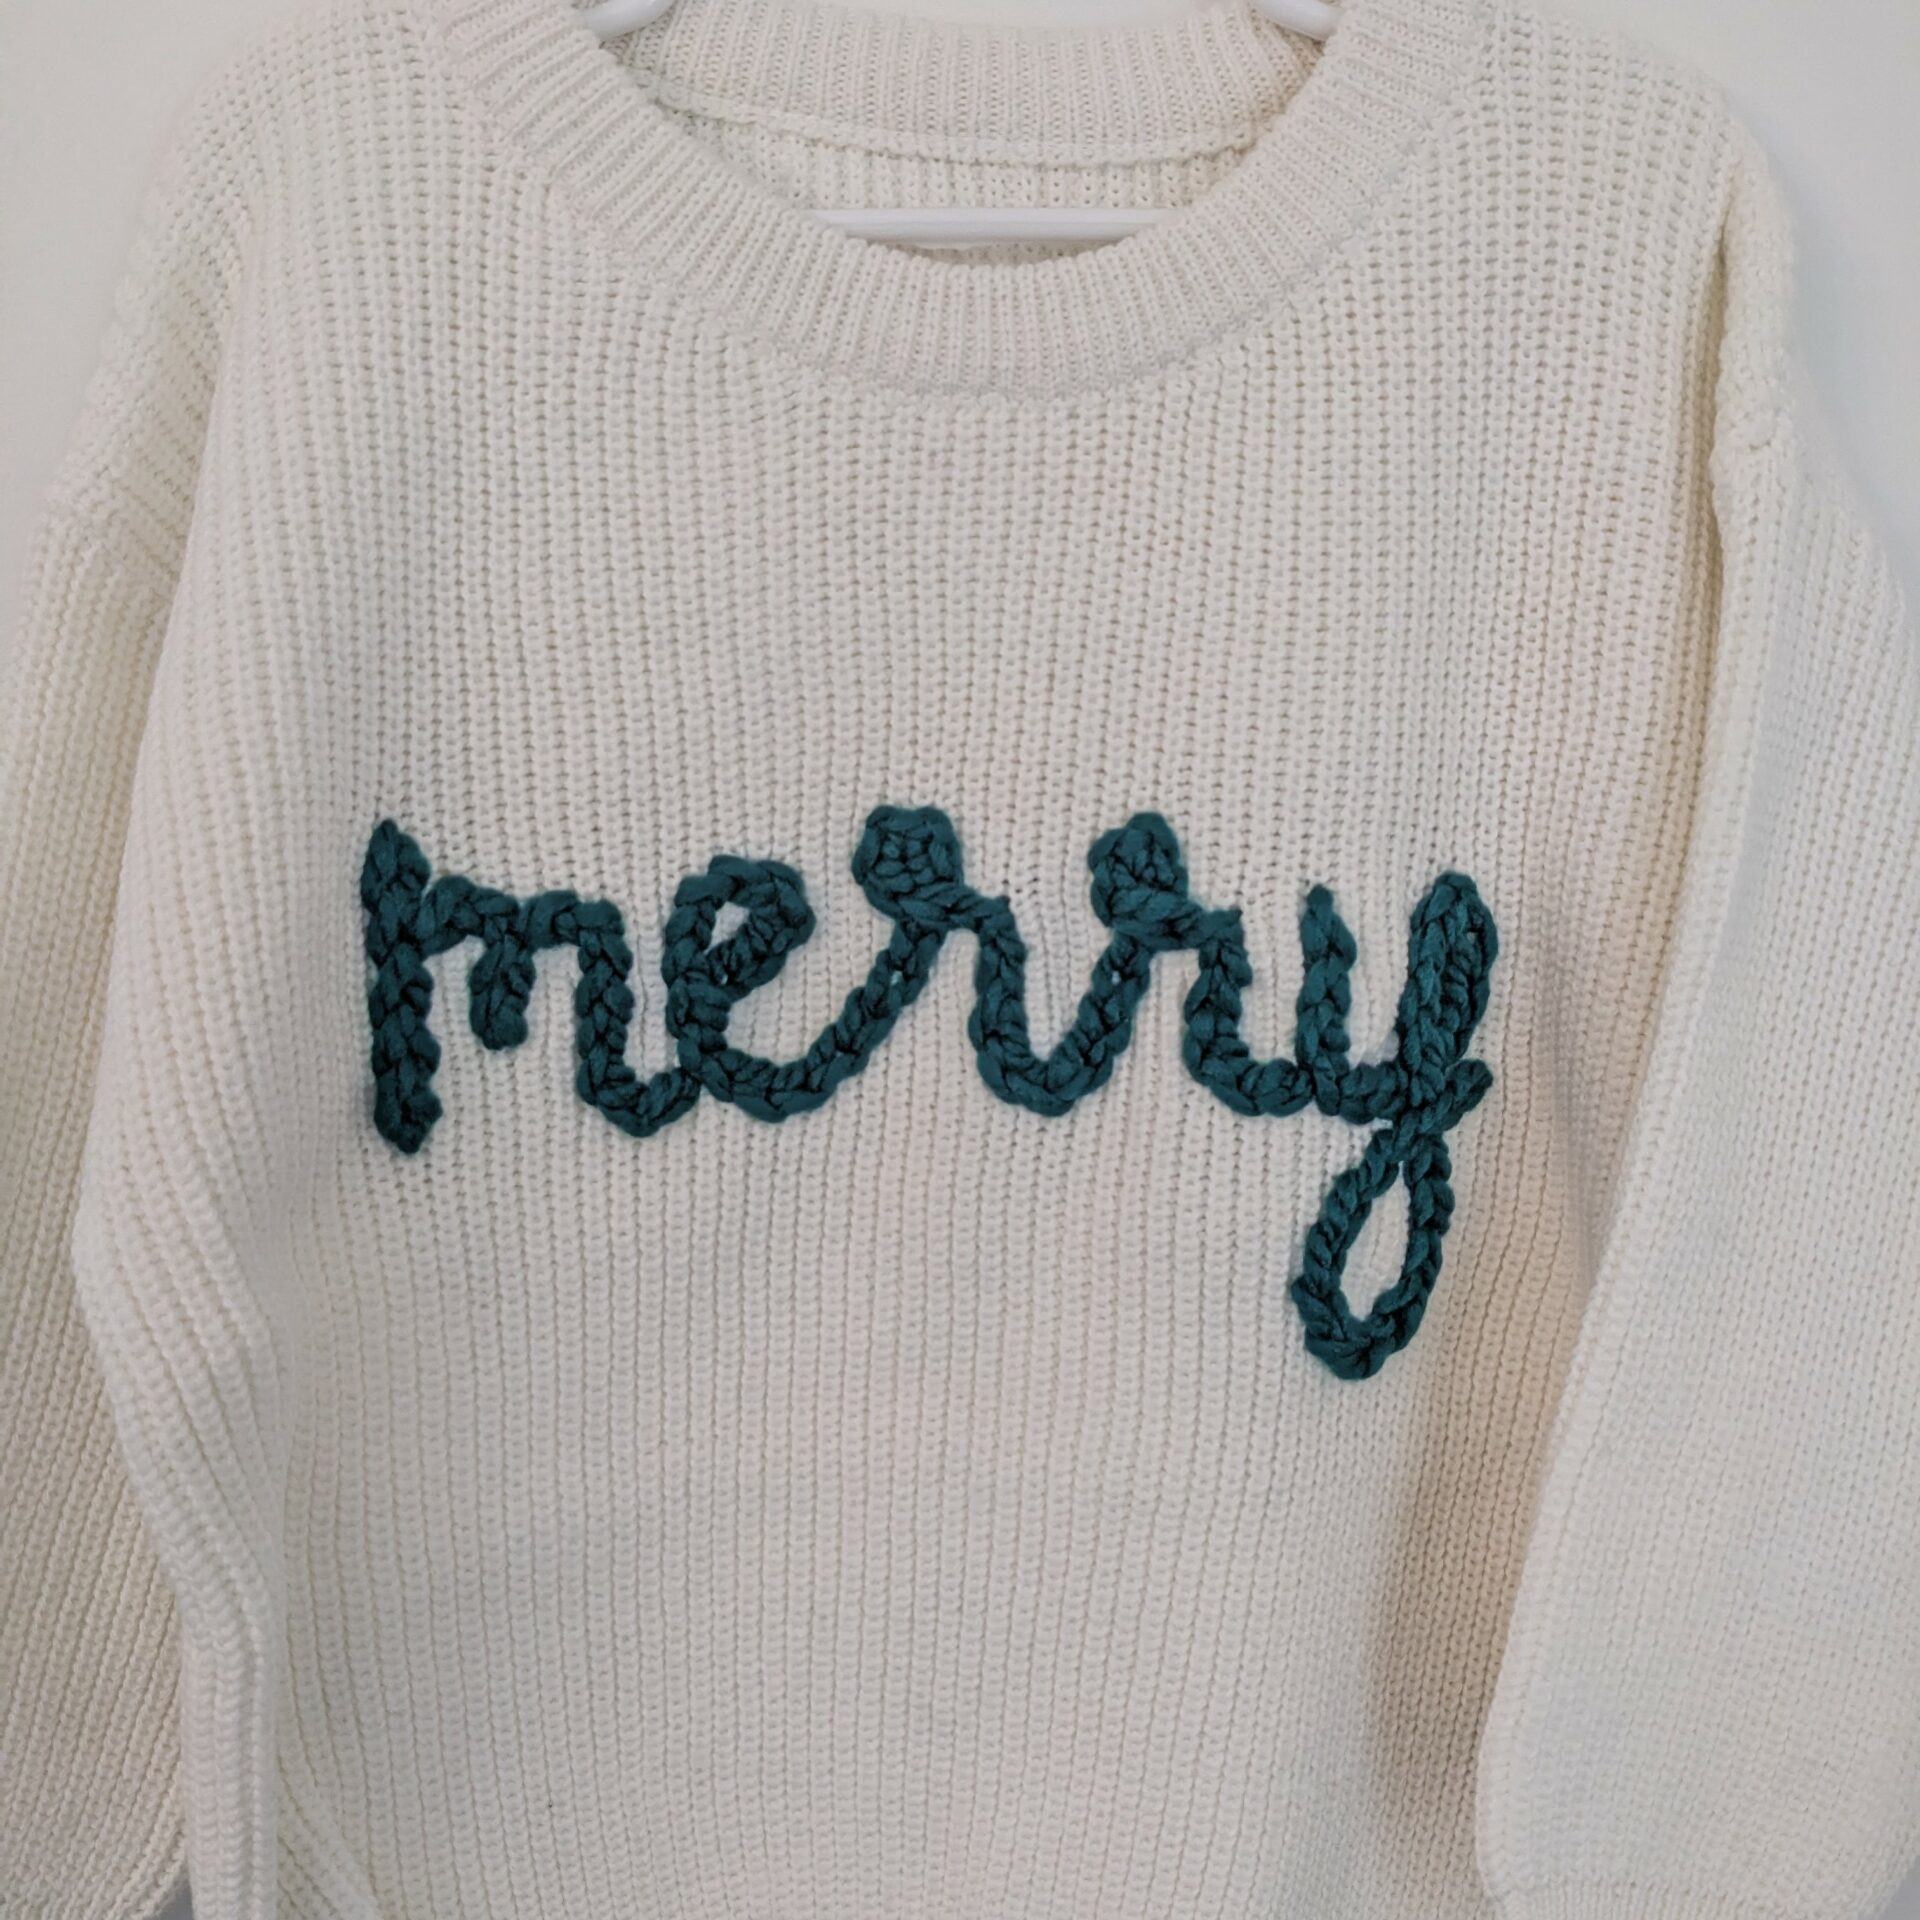 Merry Green on White Toddler Sweater